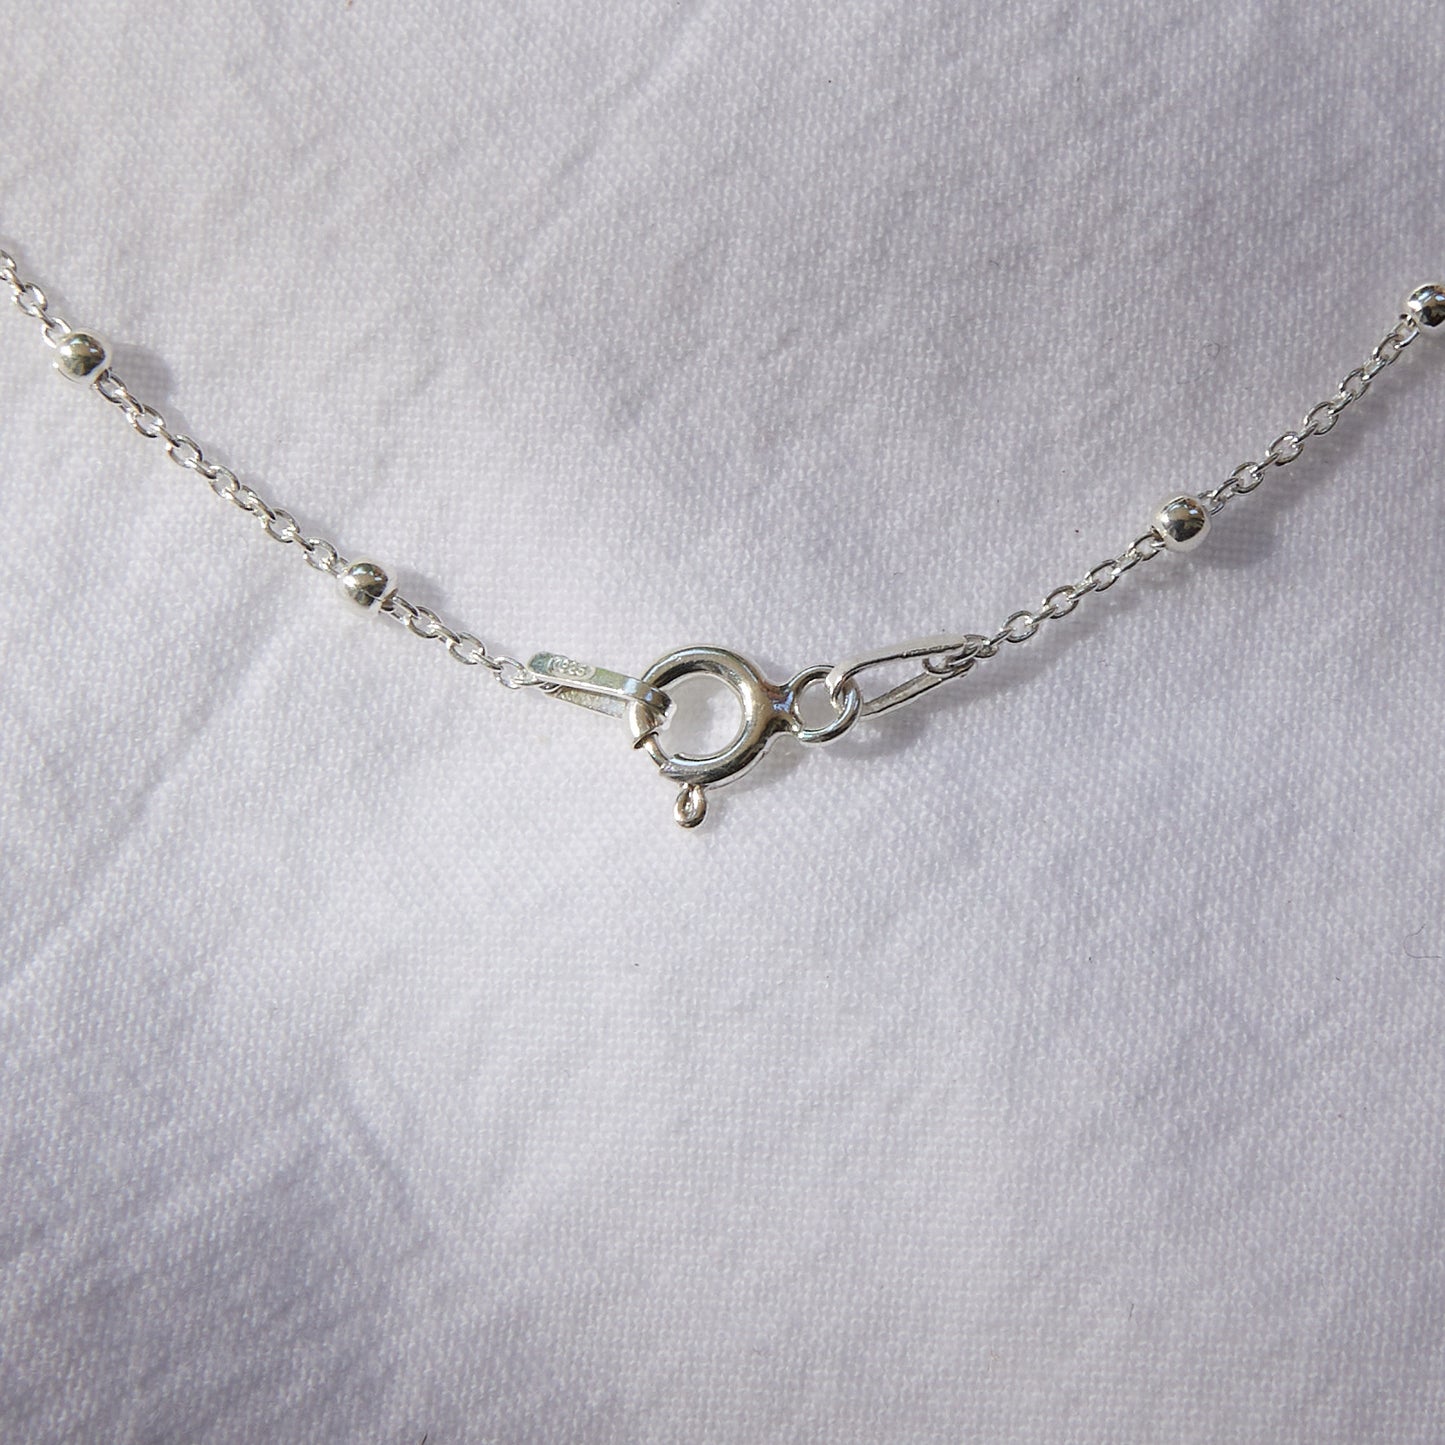 Seashell on sterling silver ball chain